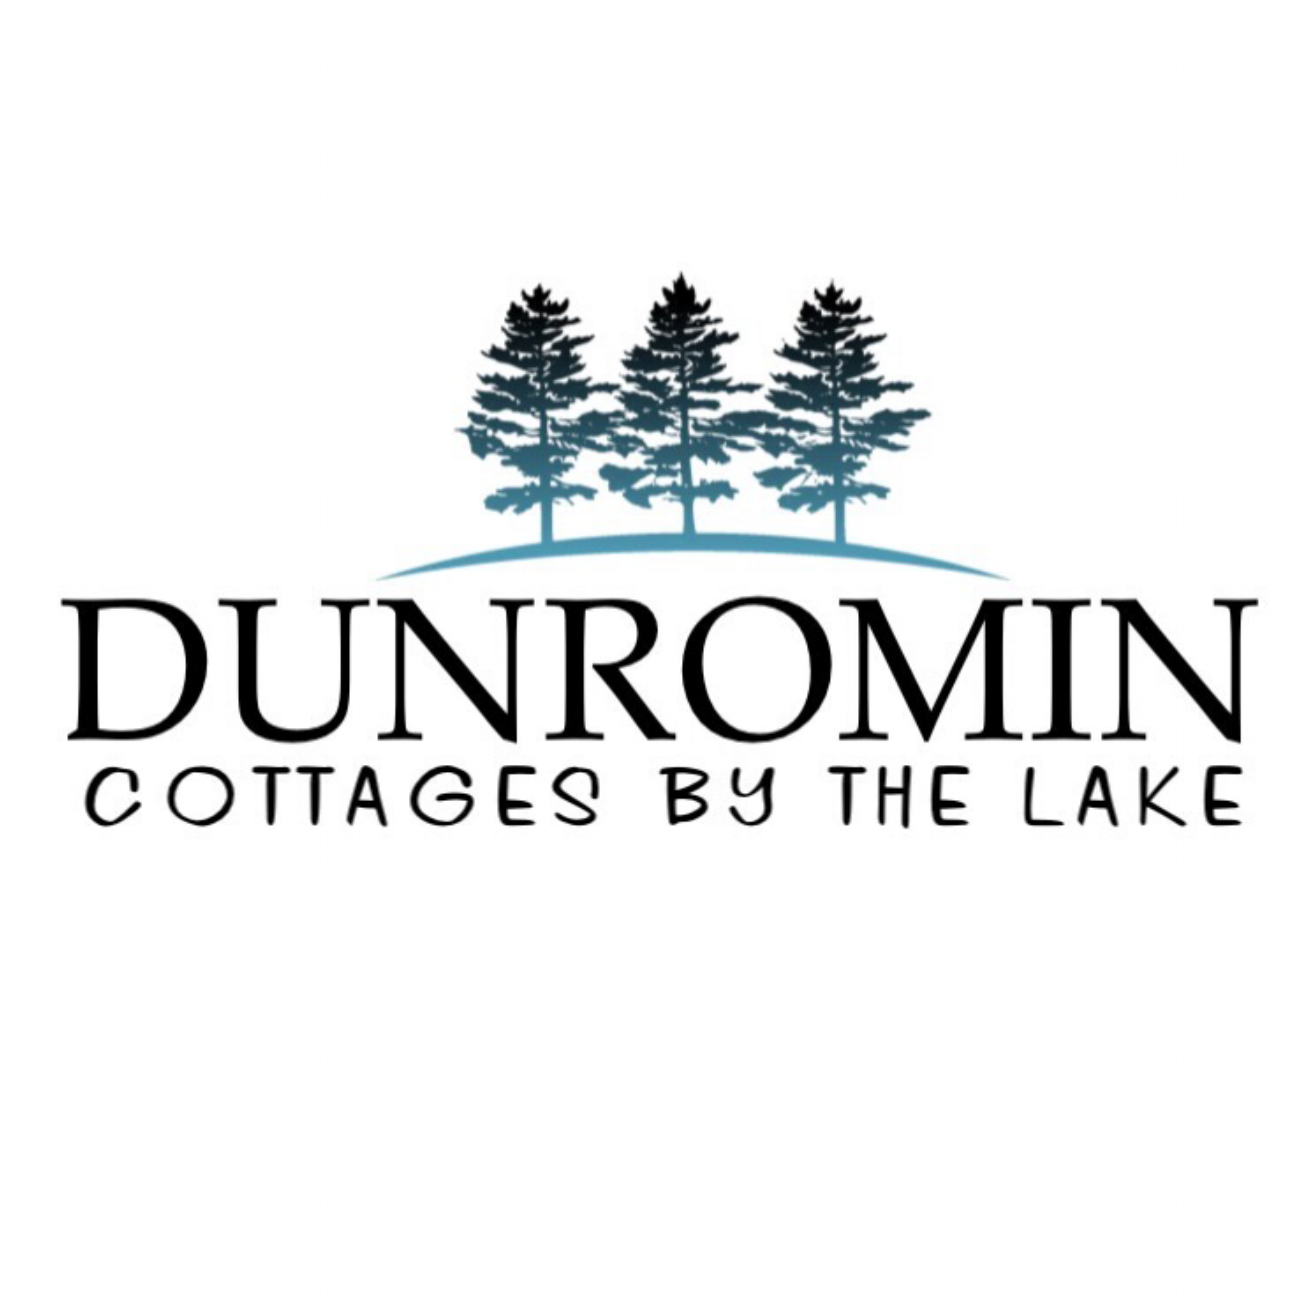 Dunromin Cottages By The Lake